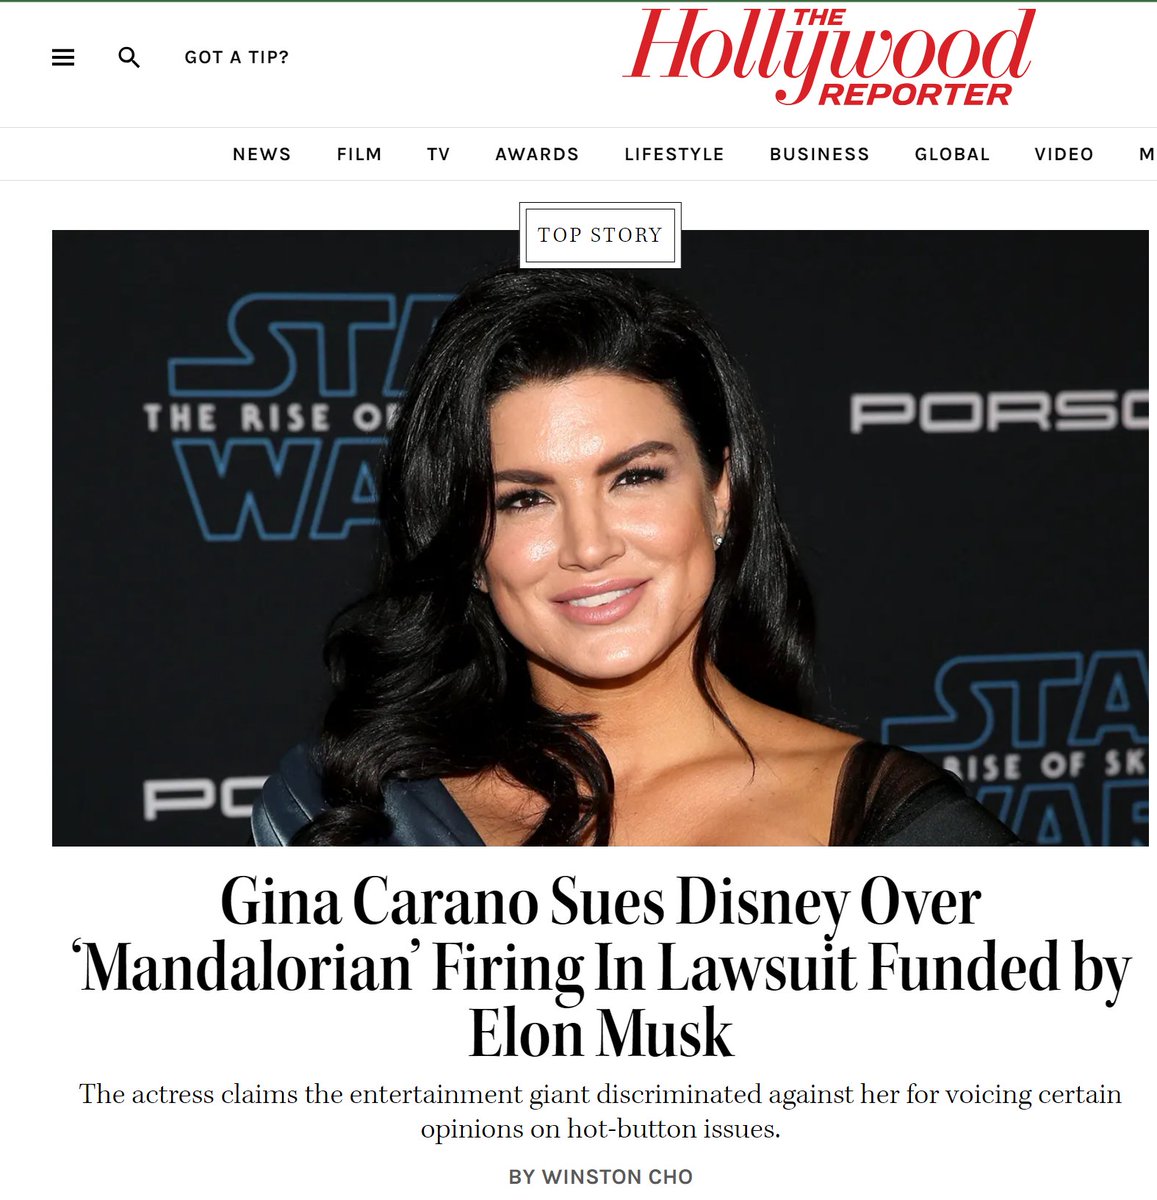 Disney fucked around.
Welcome to the find out part of this story.
You go girl! @ginacarano